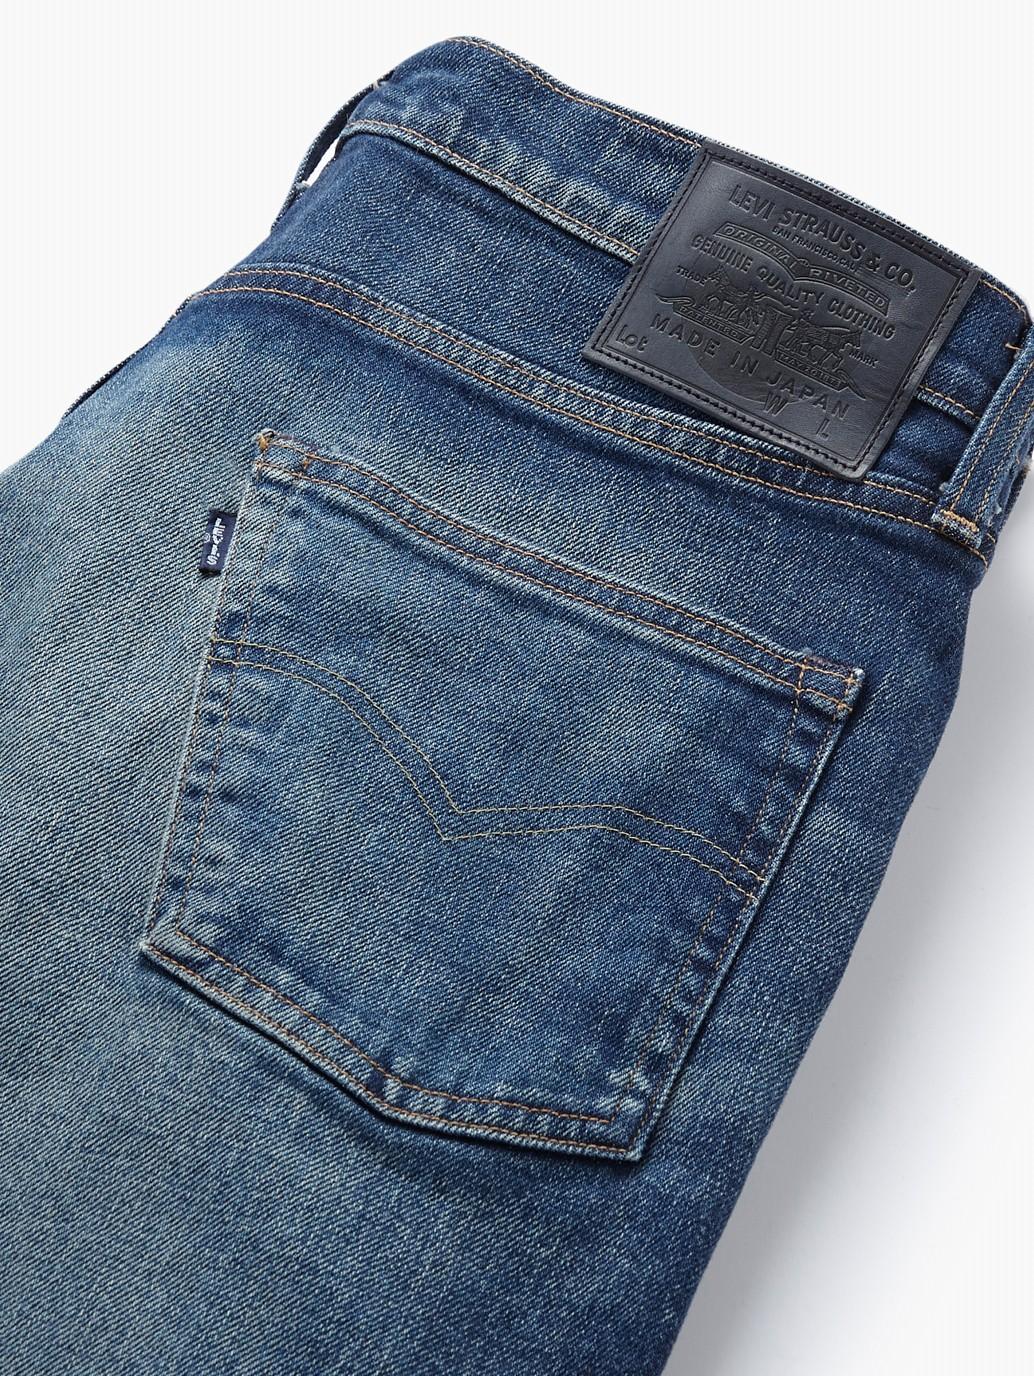 Buy Levi's® Men's Made in Japan 502™ Jeans | Levi's Official